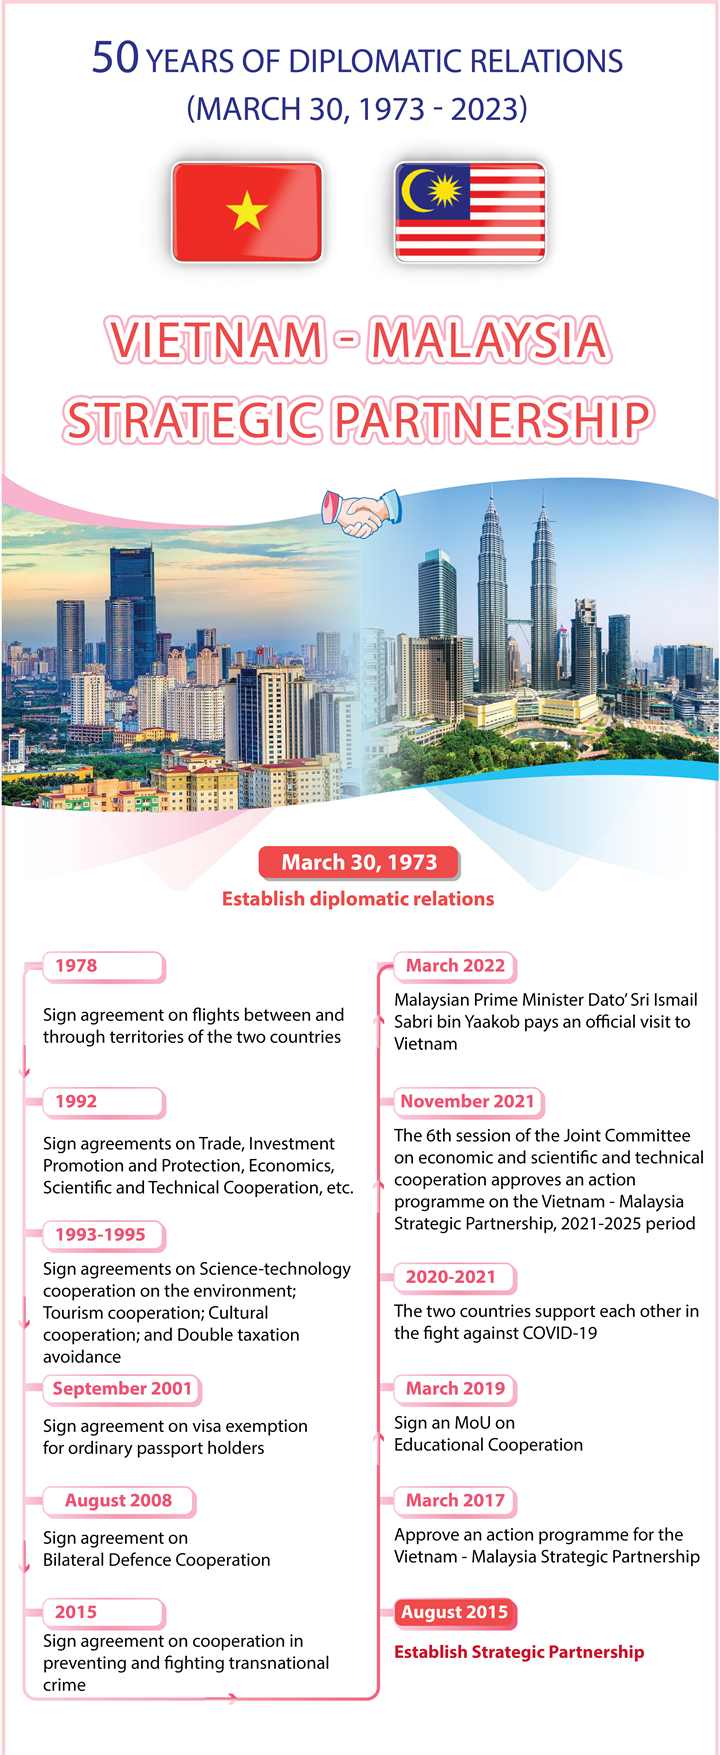 50 years of diplomatic relations (March 30, 1973 - 2023)